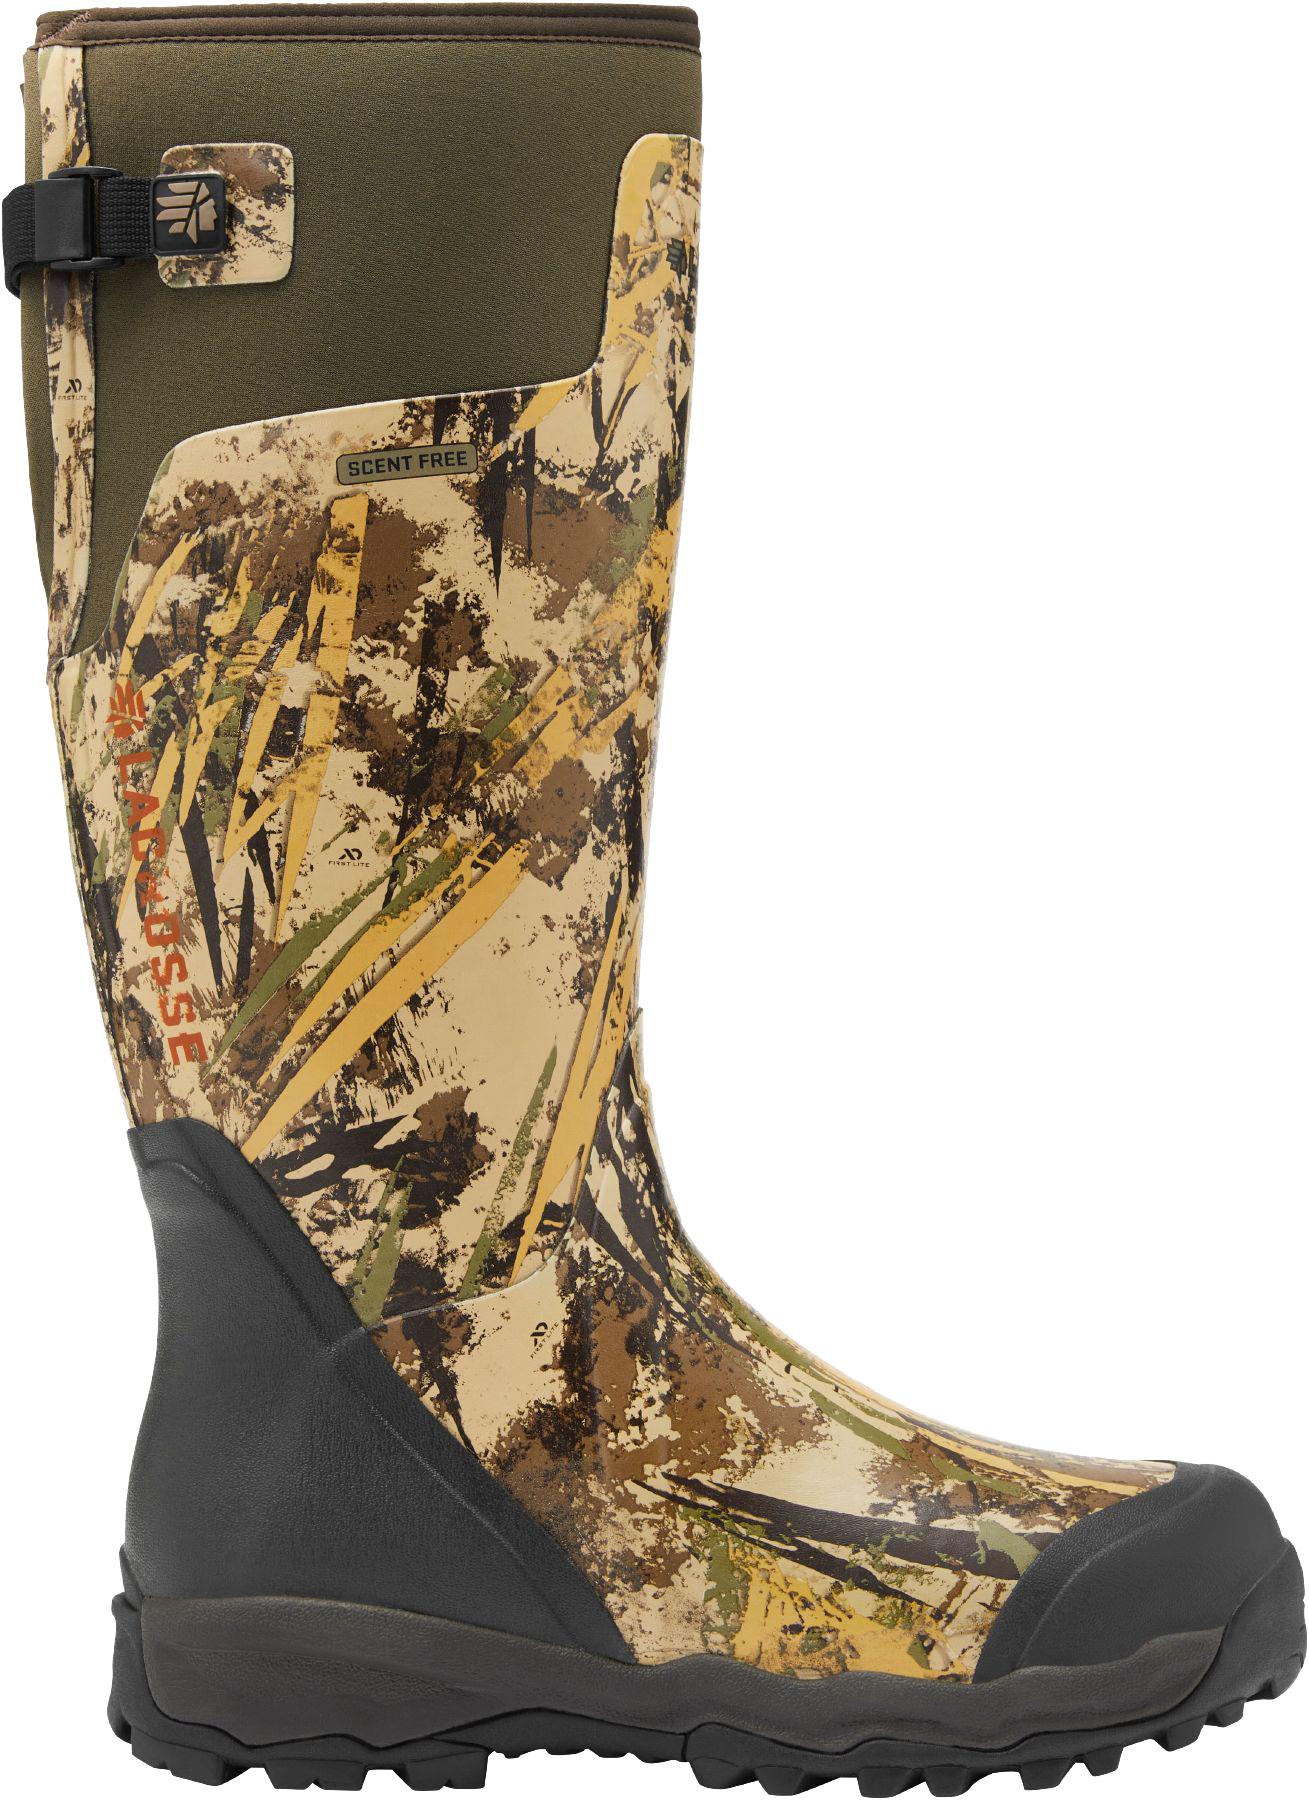 LaCrosse AlphaBurly Pro Hunting Boots for Men - First Lite Typha - 13M